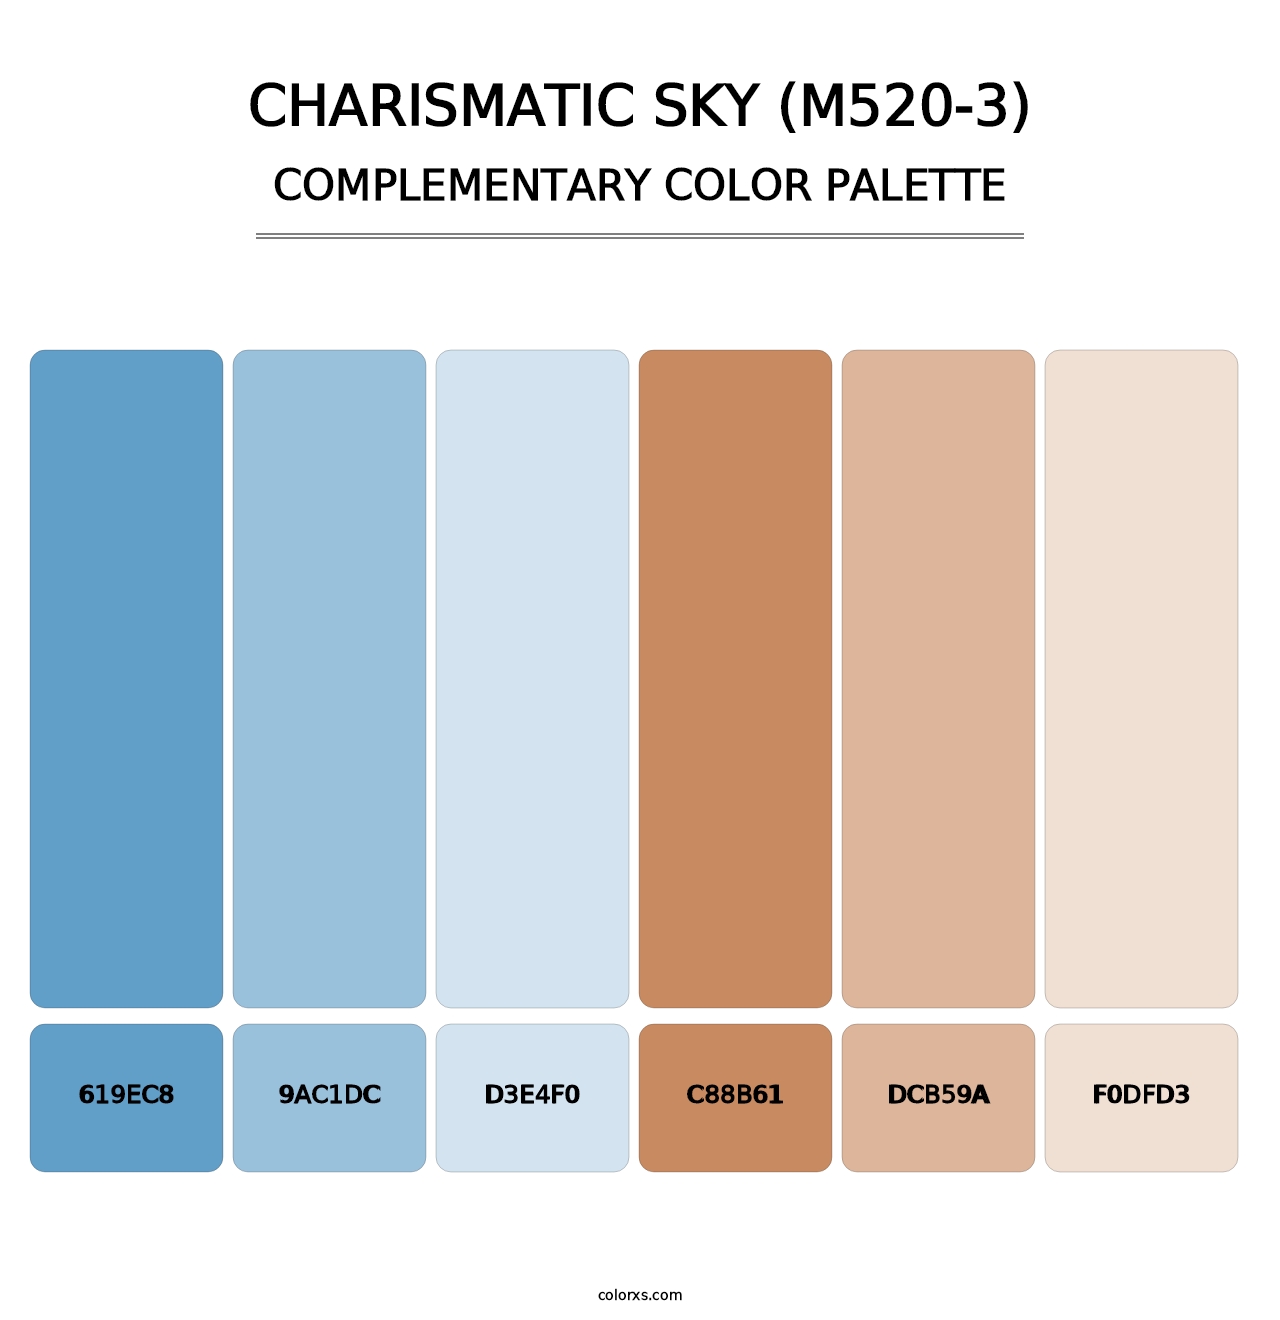 Charismatic Sky (M520-3) - Complementary Color Palette